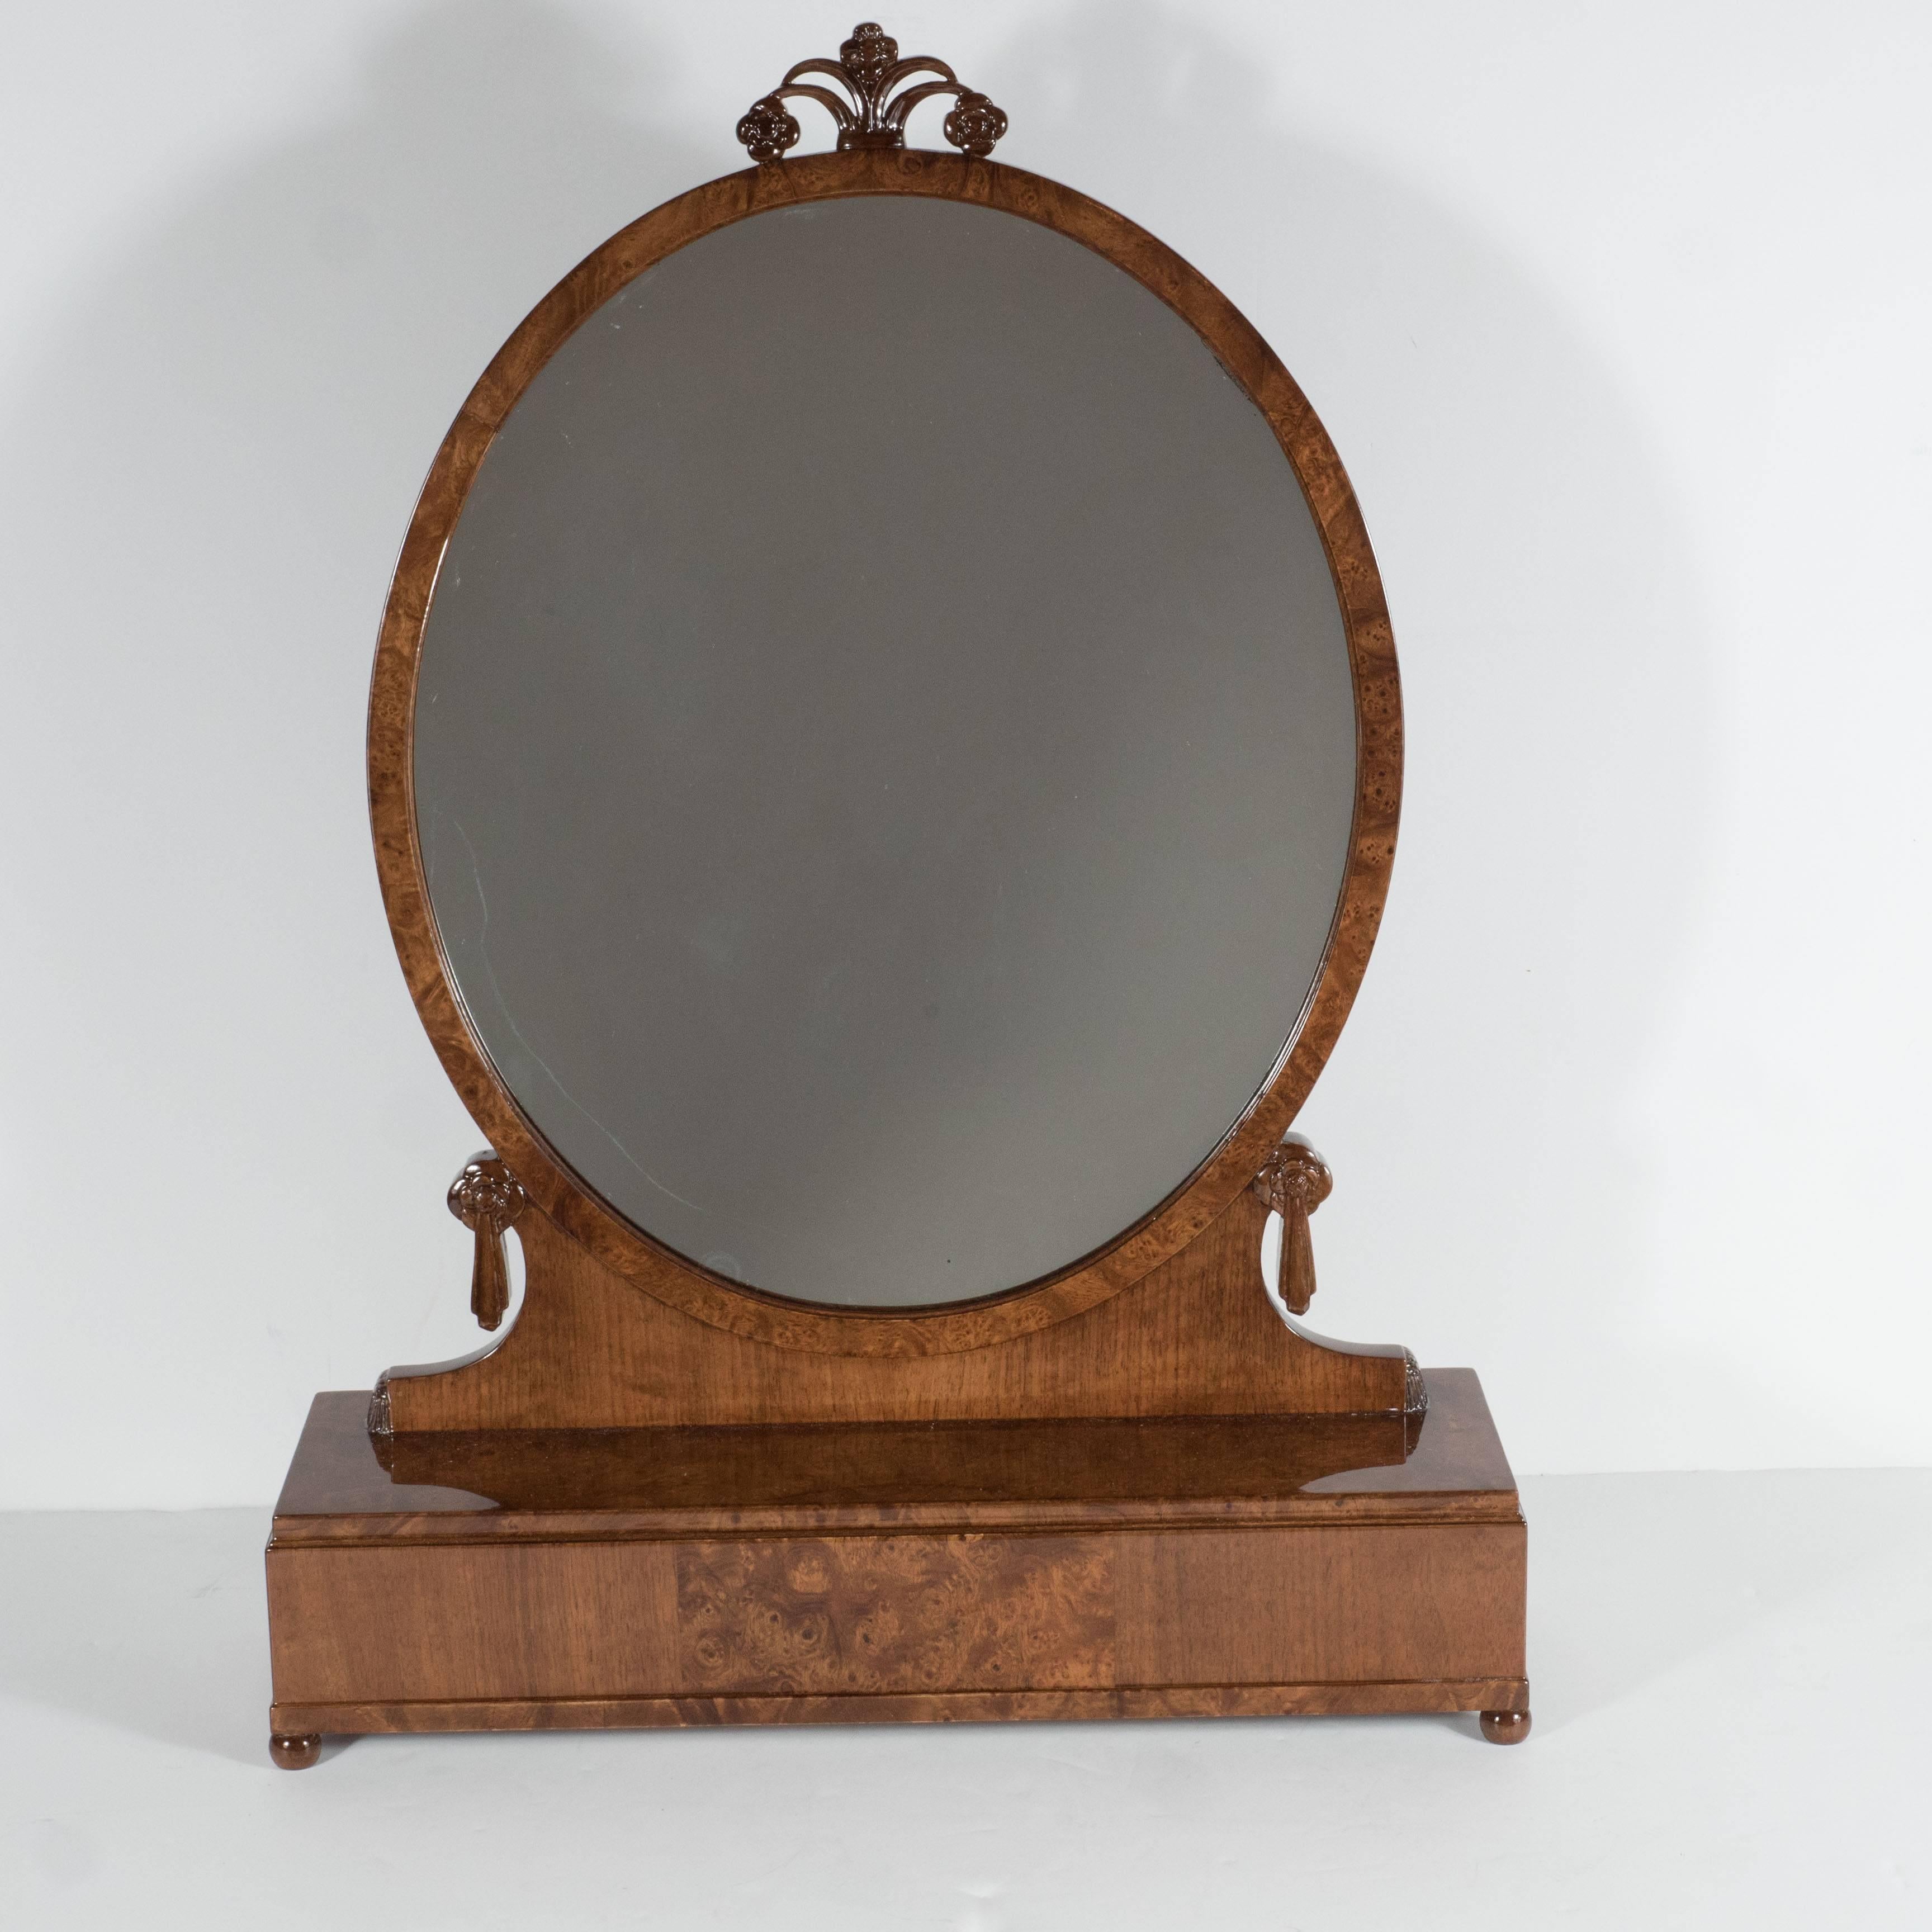 This exquisite Art Deco book-matched exotic wood lady's top dresser mirror,was realized circa 1935 in the style of Jacques Emile Ruhlmann. It features Carpathian burled Elm and walnut hand-carved stylized foliate detailing. The oval shaped mirror is